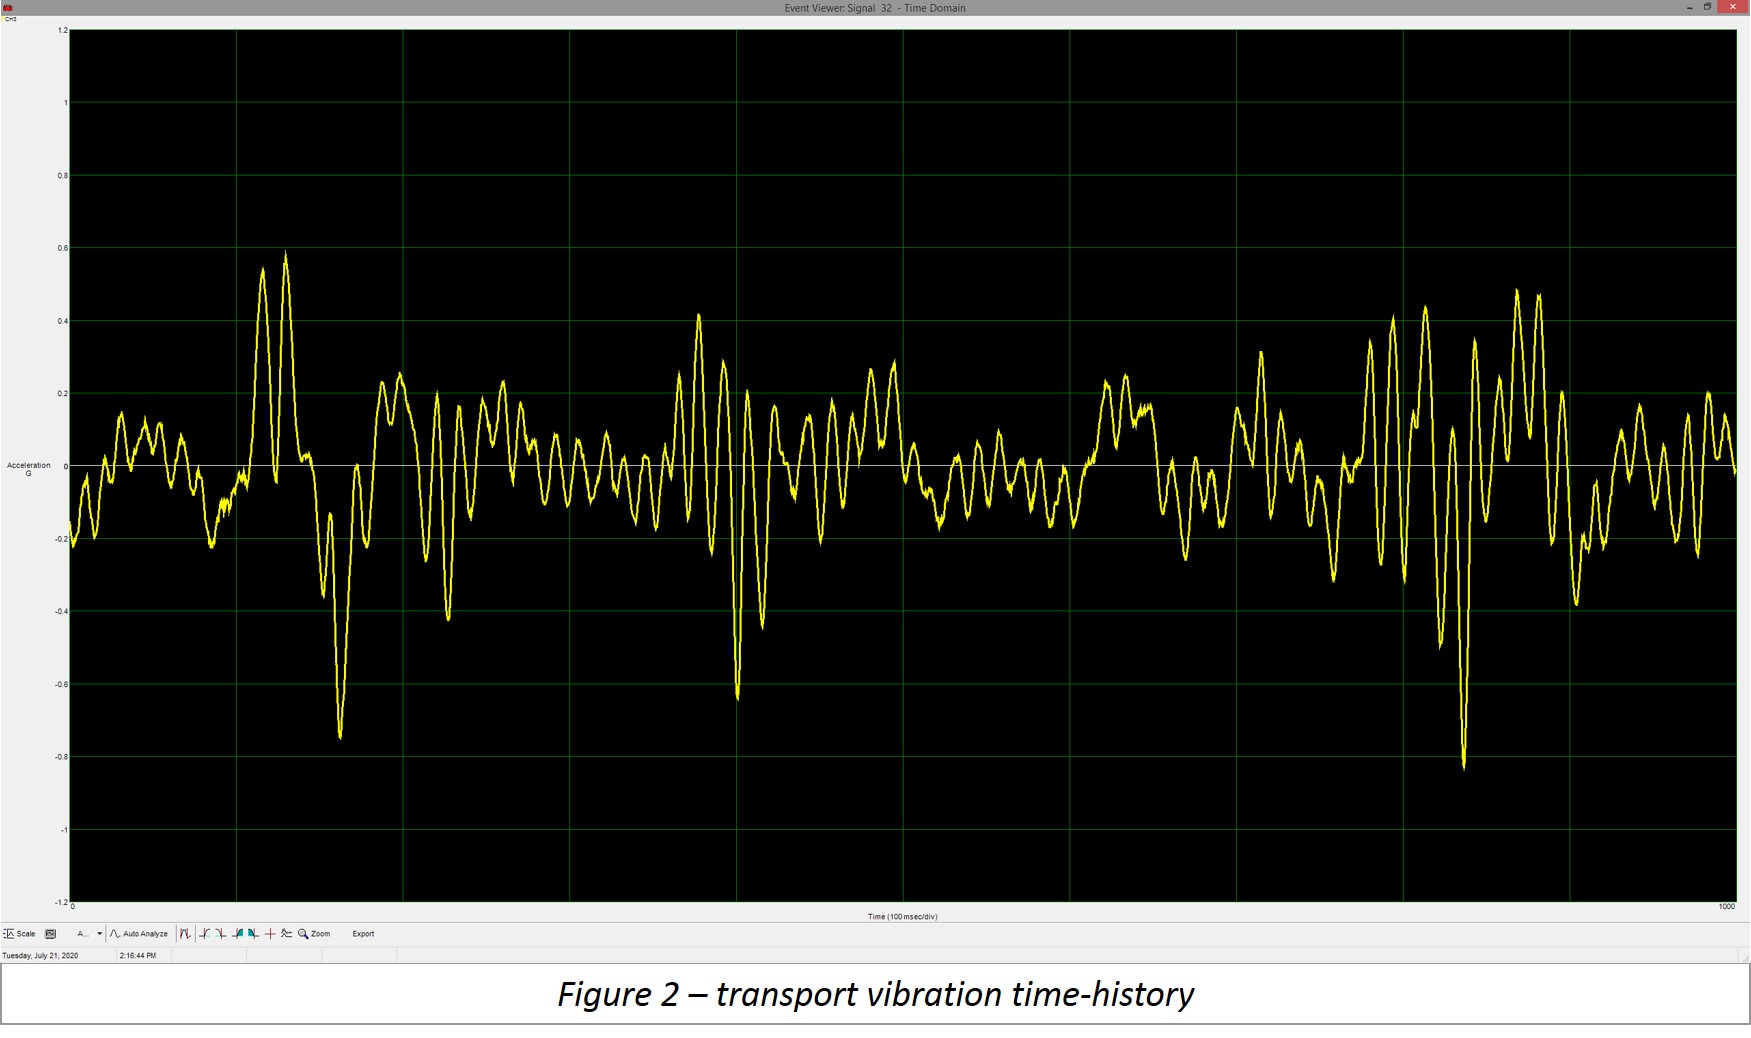 Graph of transport vibration time-history.